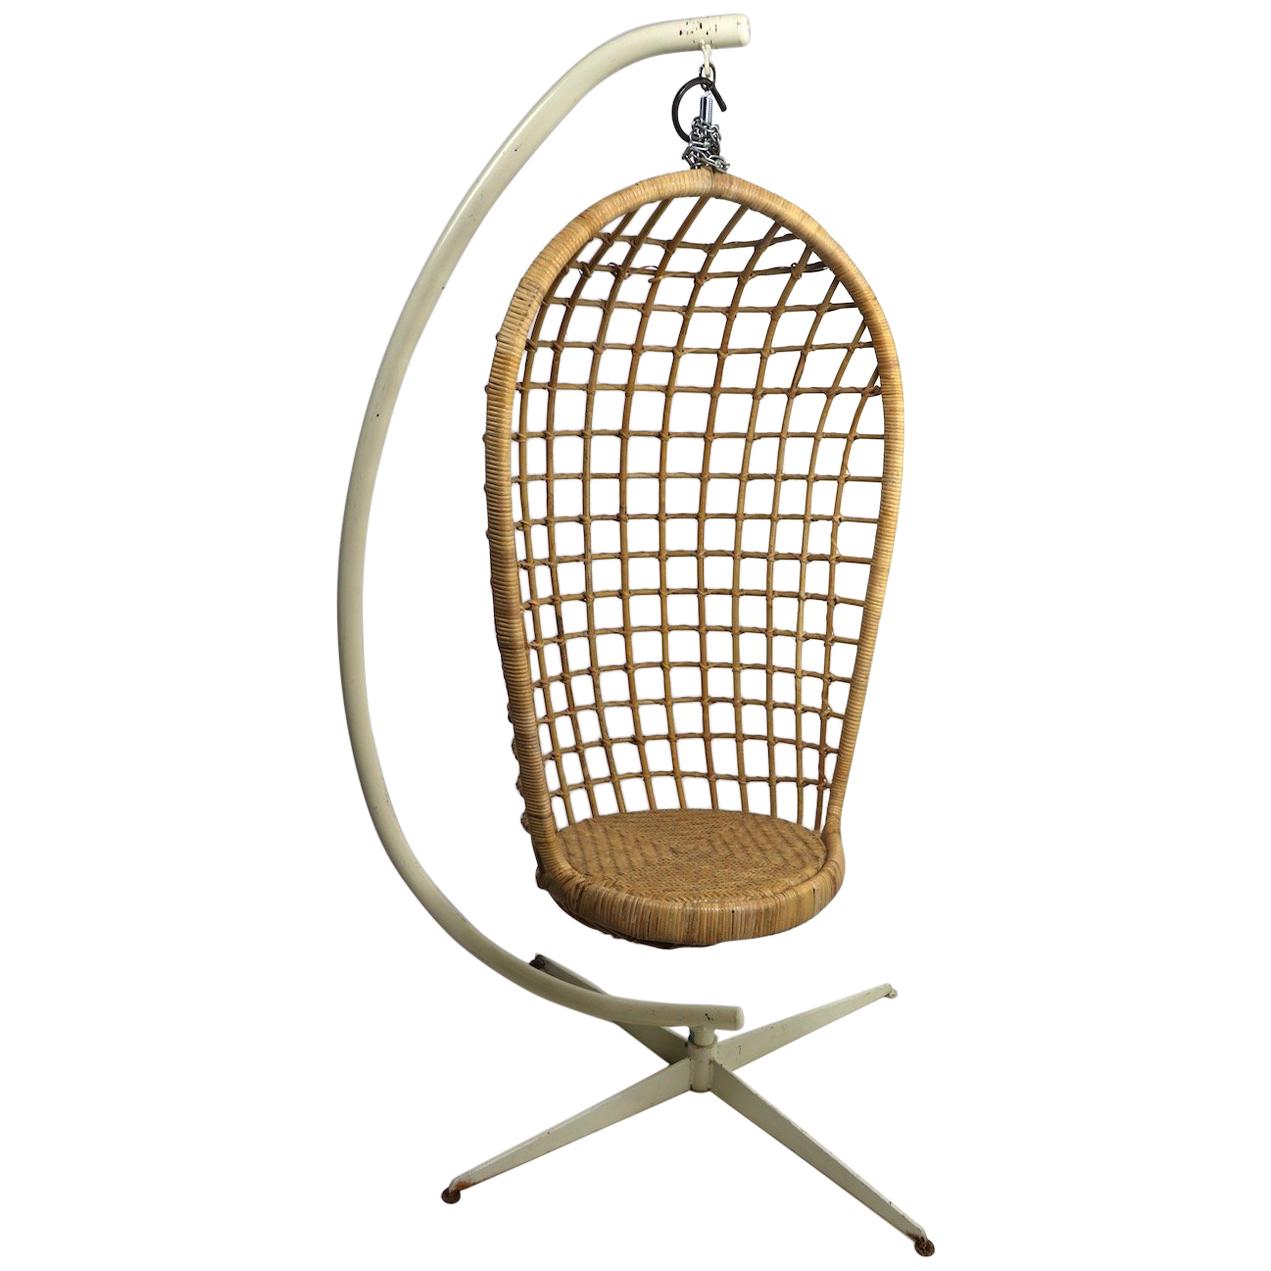 Hanging Wicker Pod Chair with Original Metal Stand